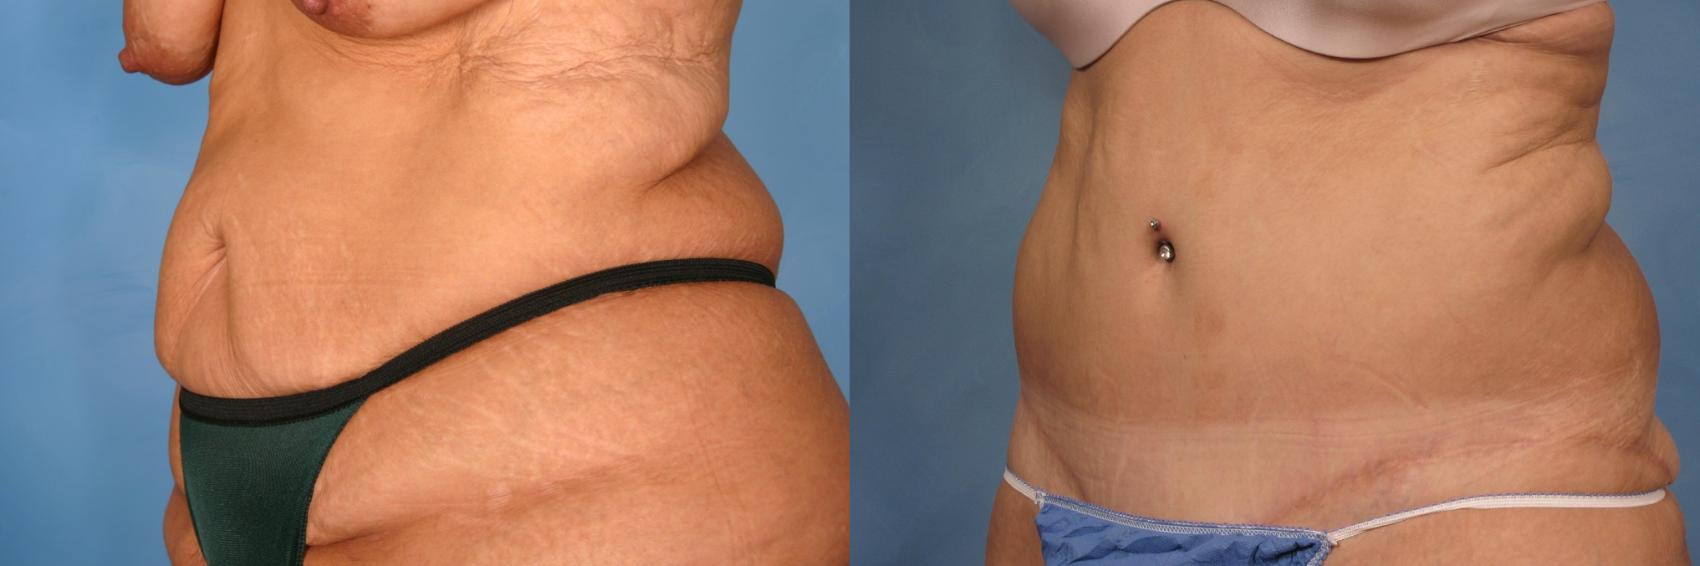 how much is a tummy tuck